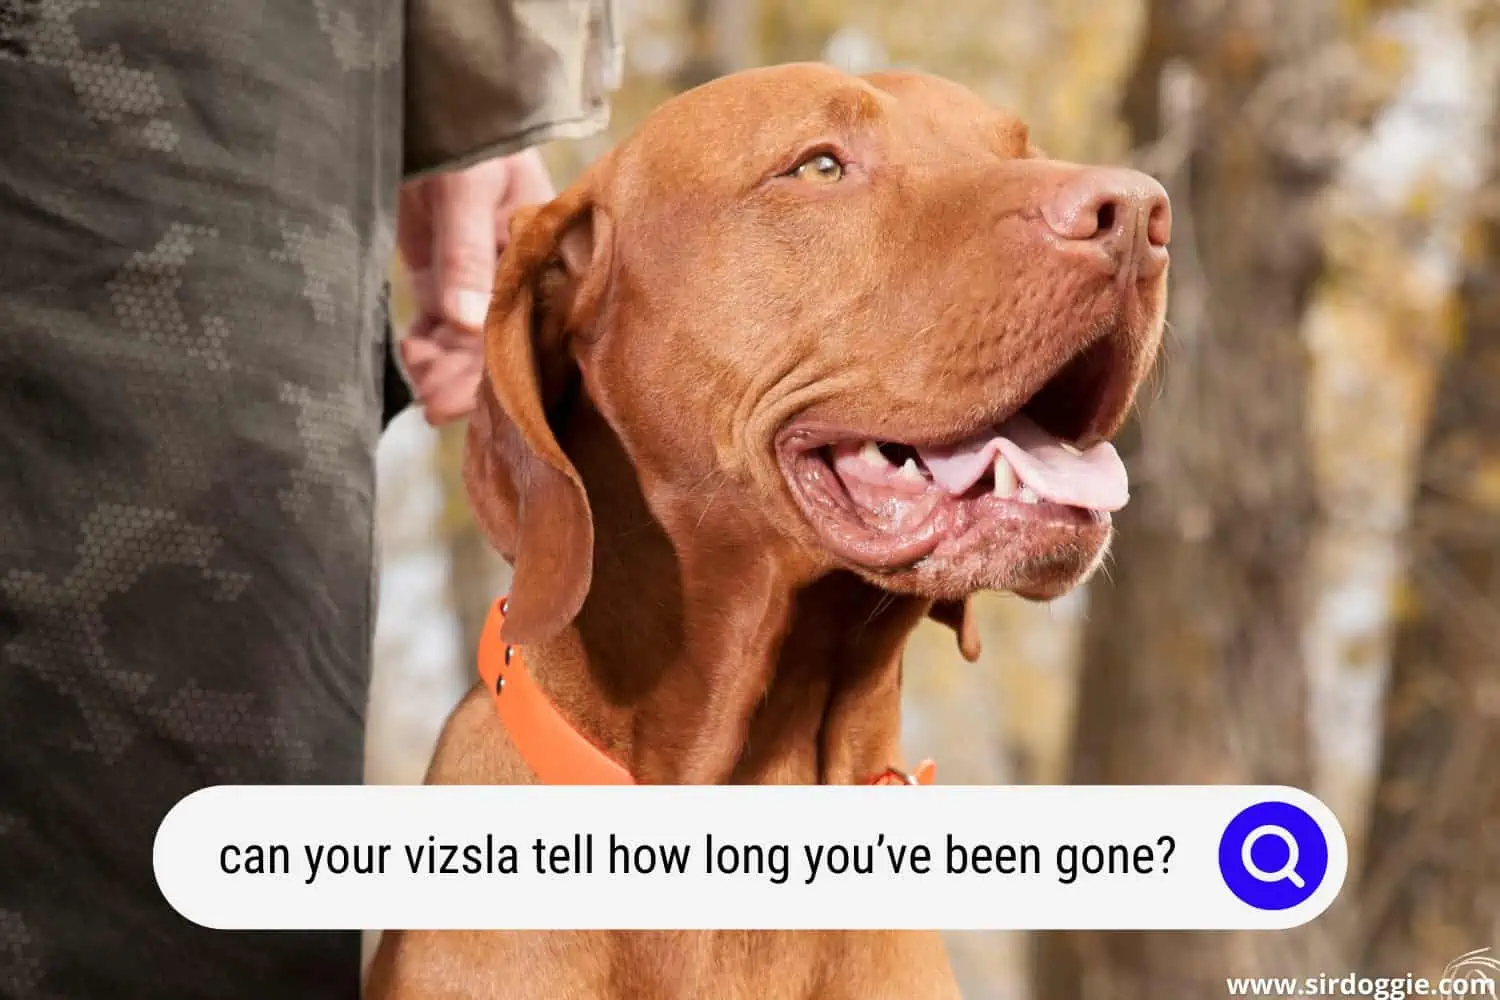 can your vizsla tell how long you've been gone